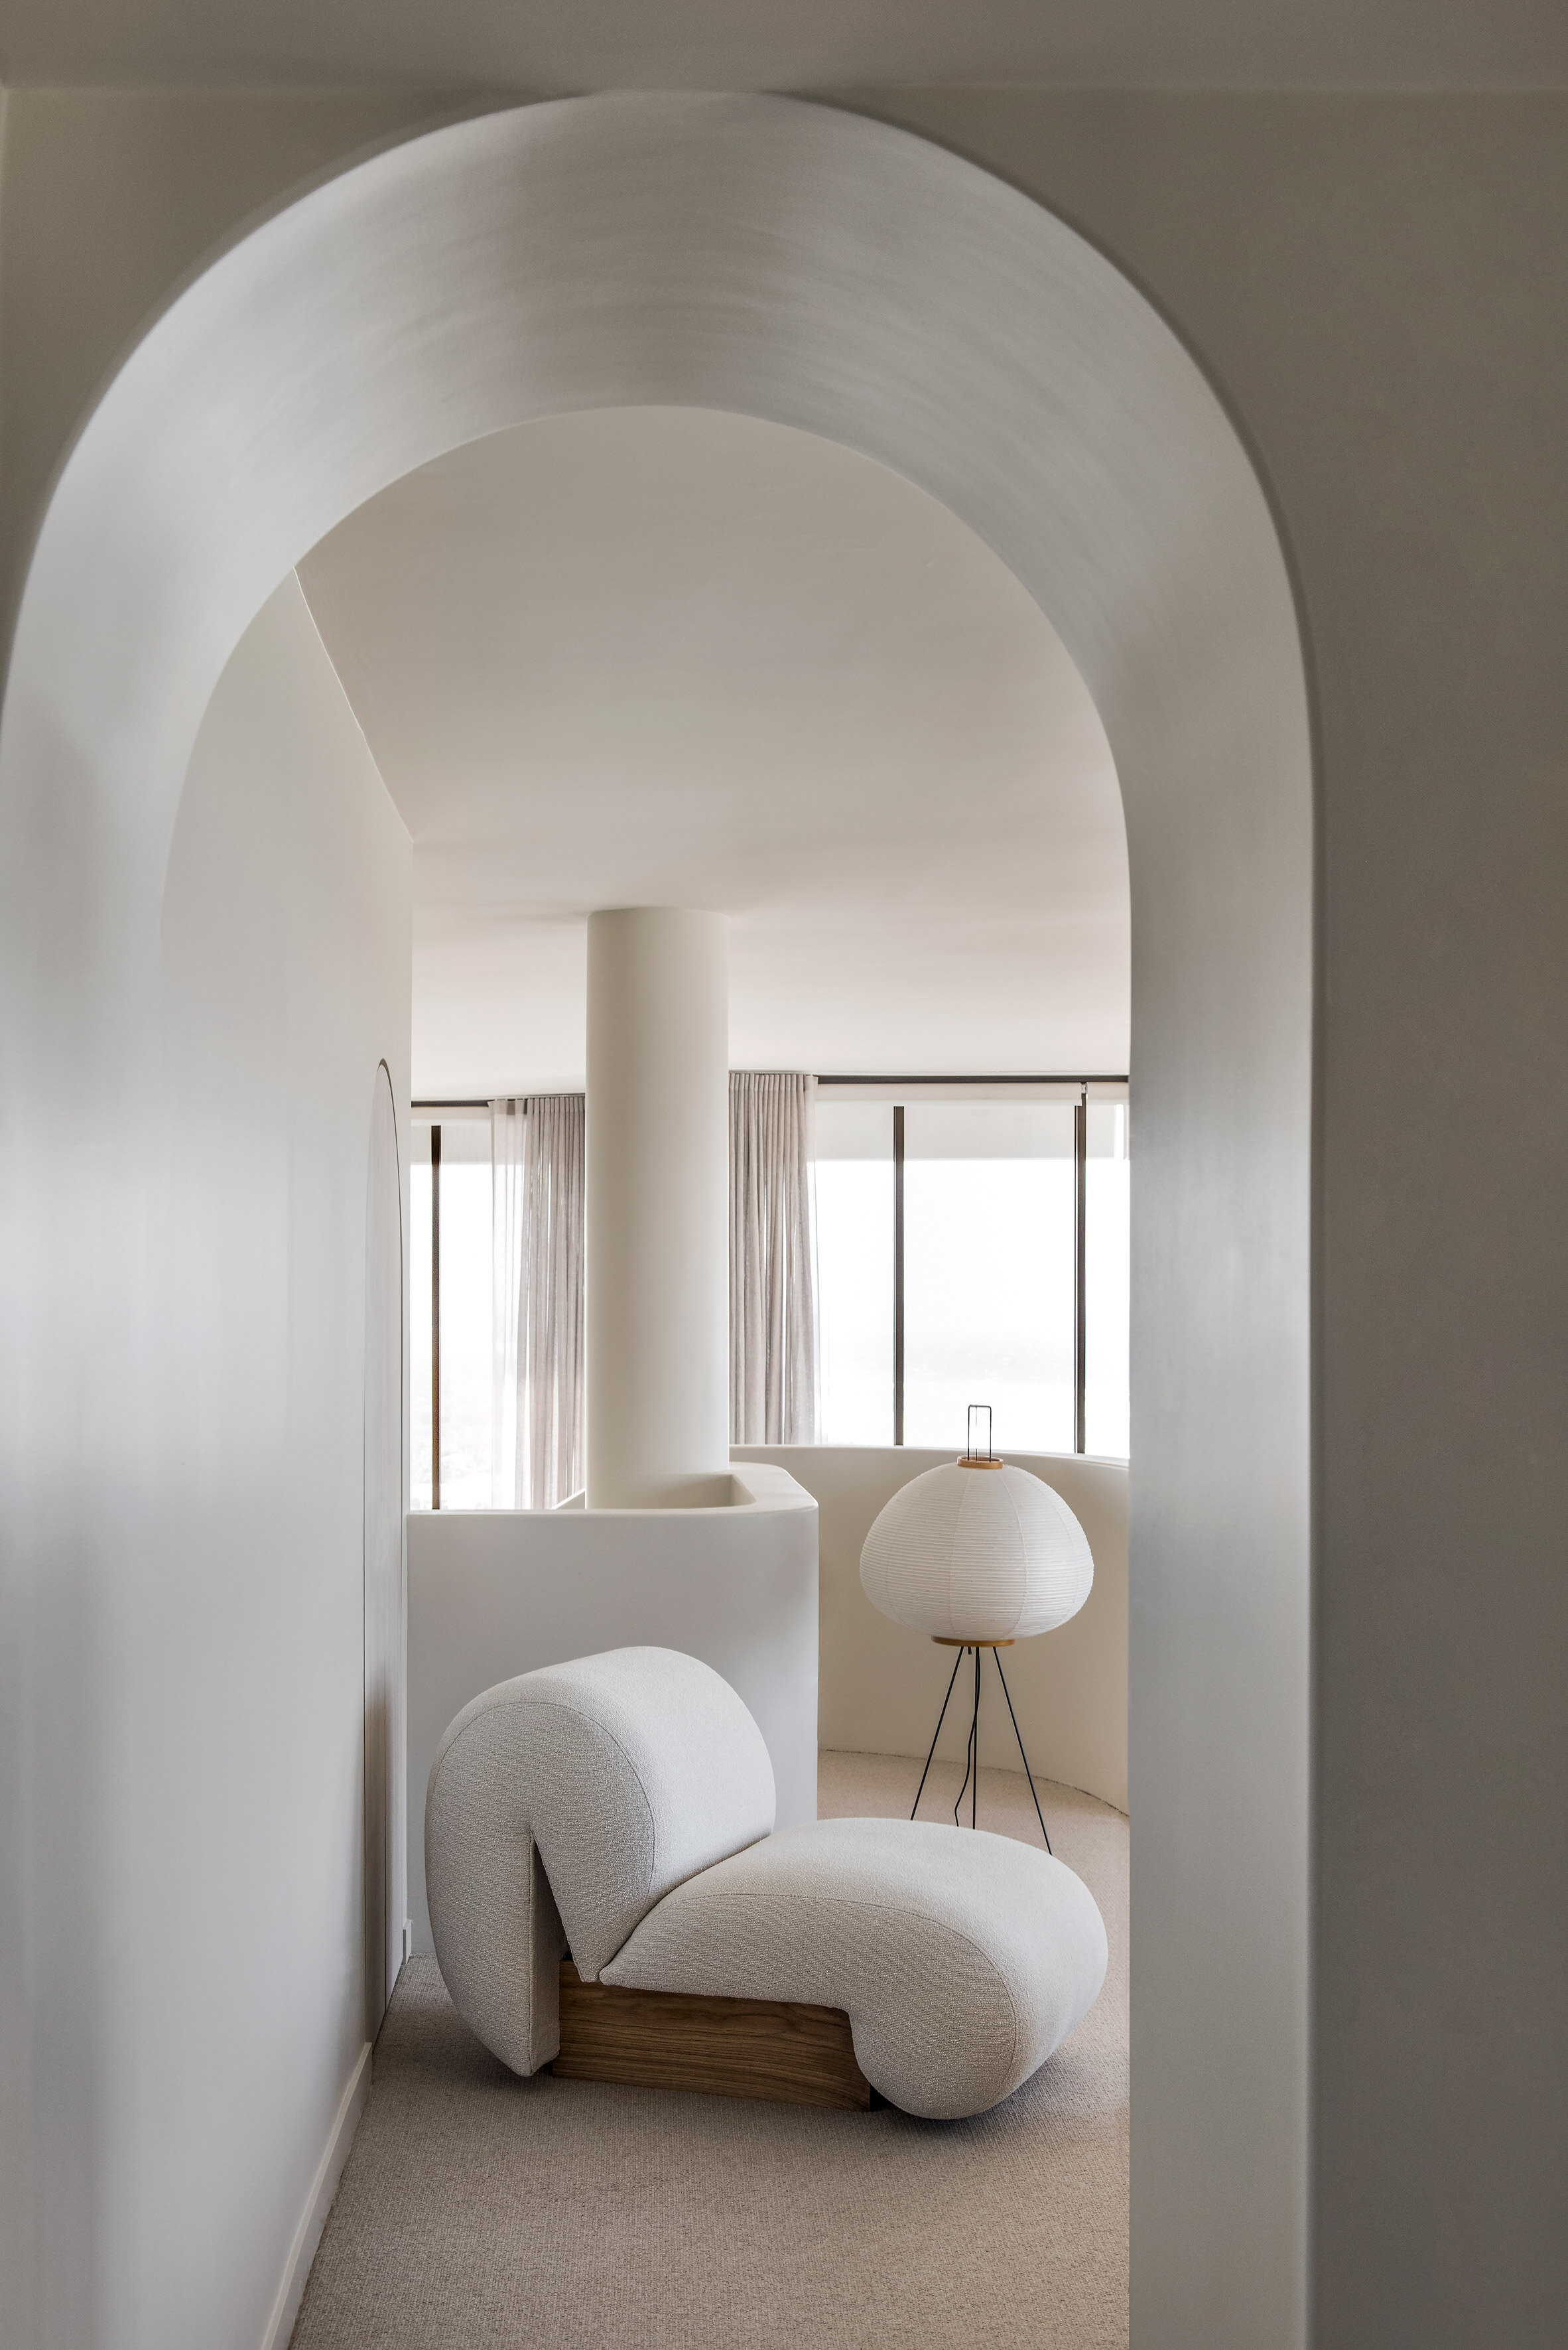 Design Trend We Love: Arches and Curves | Cuisines Steam